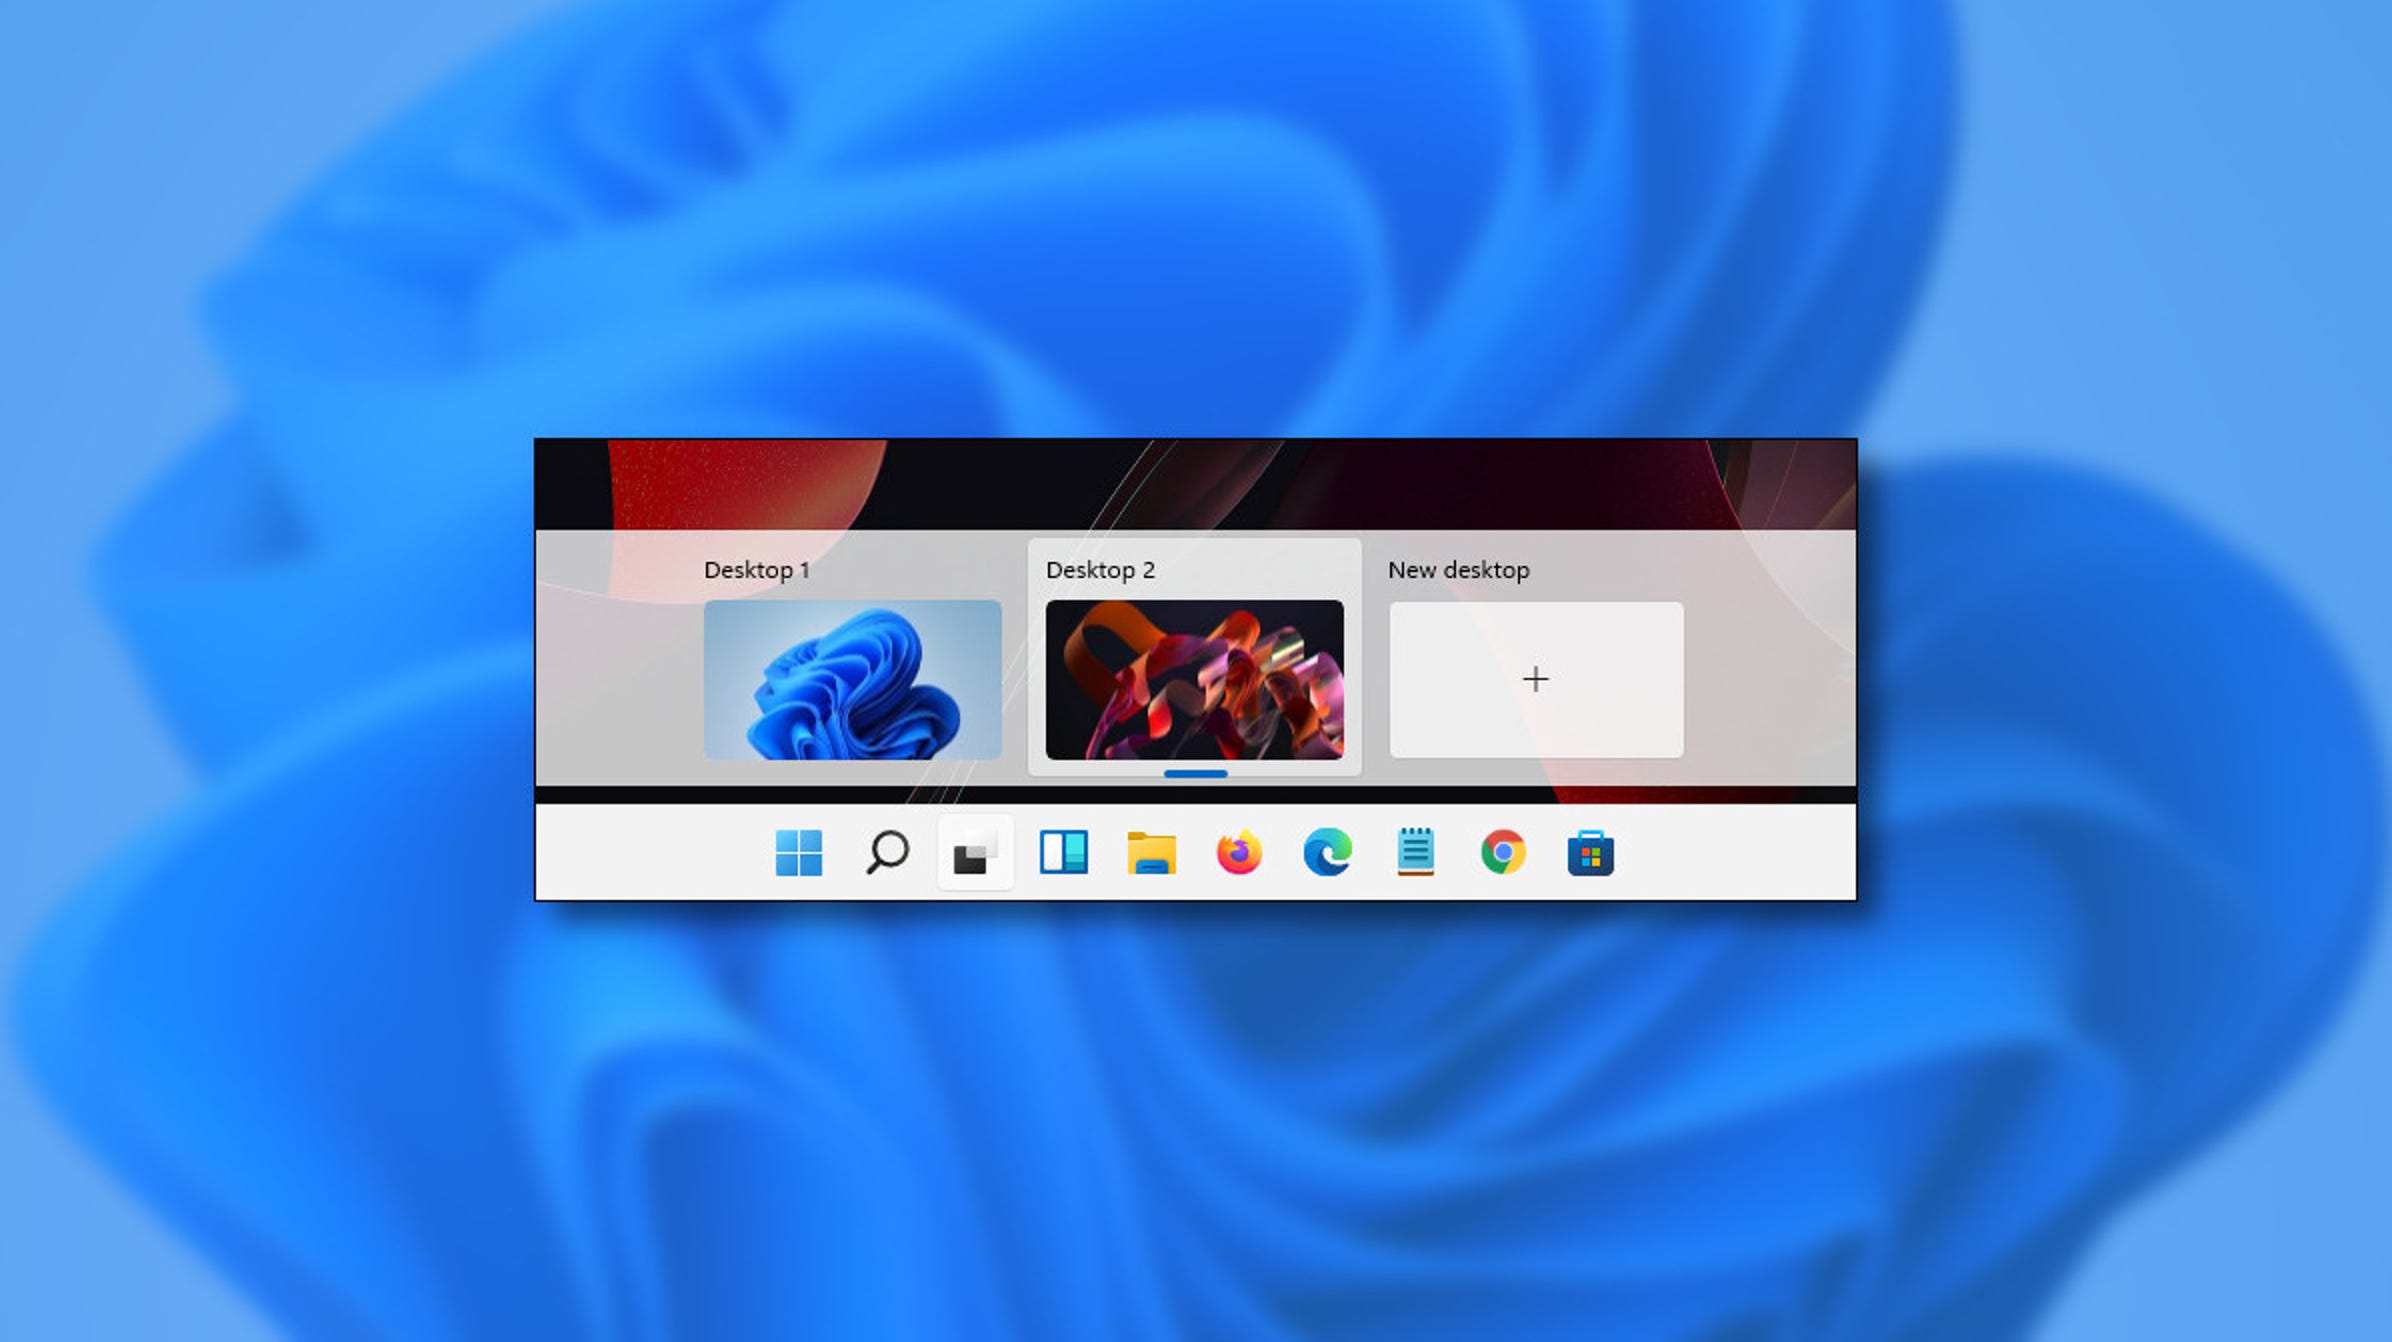 How to set different wallpapers for virtual desktops on windows